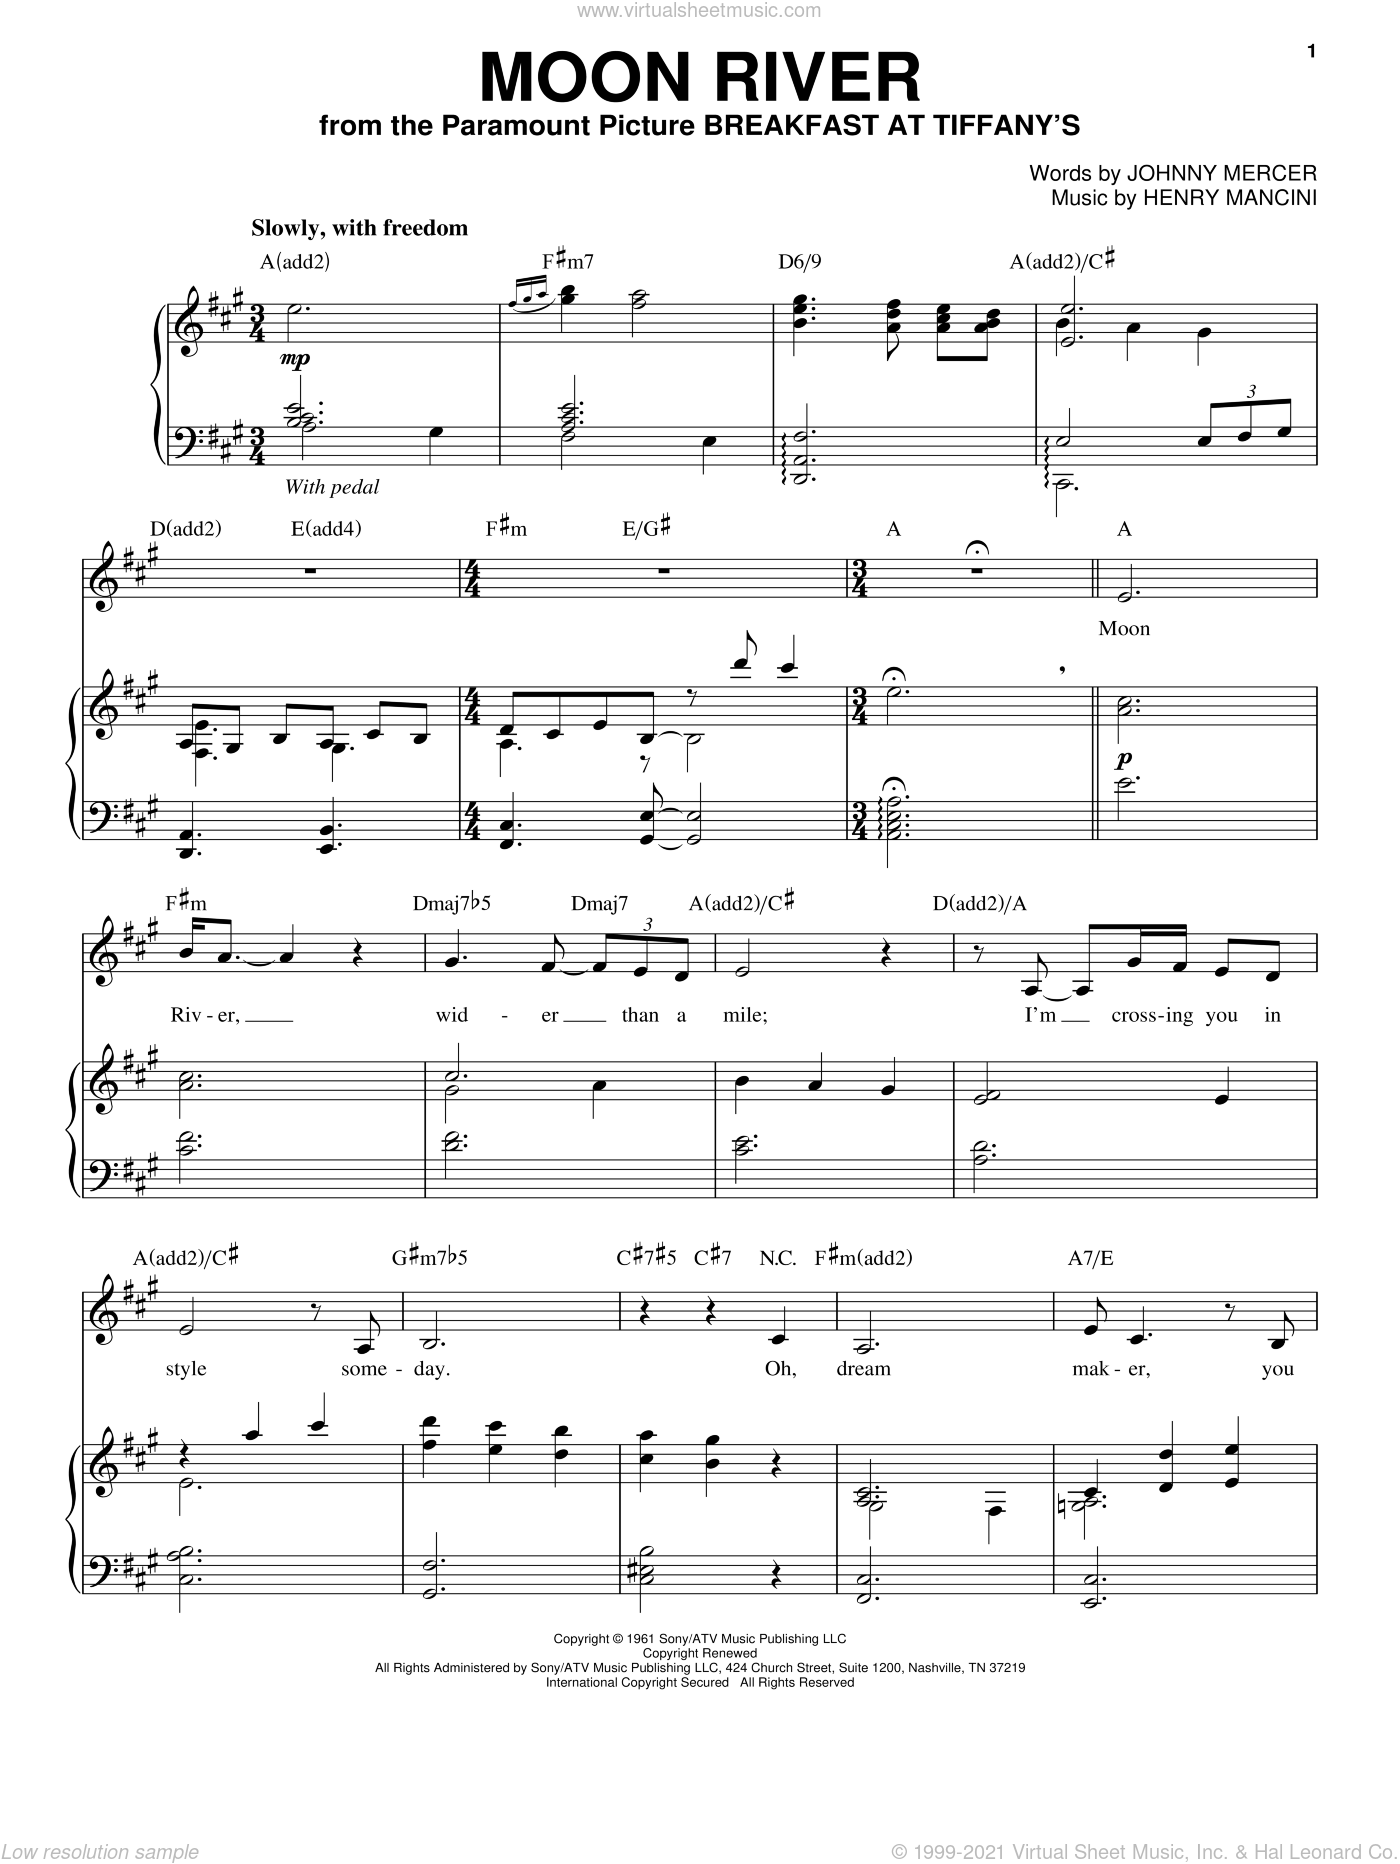 Bocelli - Moon River sheet music for voice and piano [PDF]